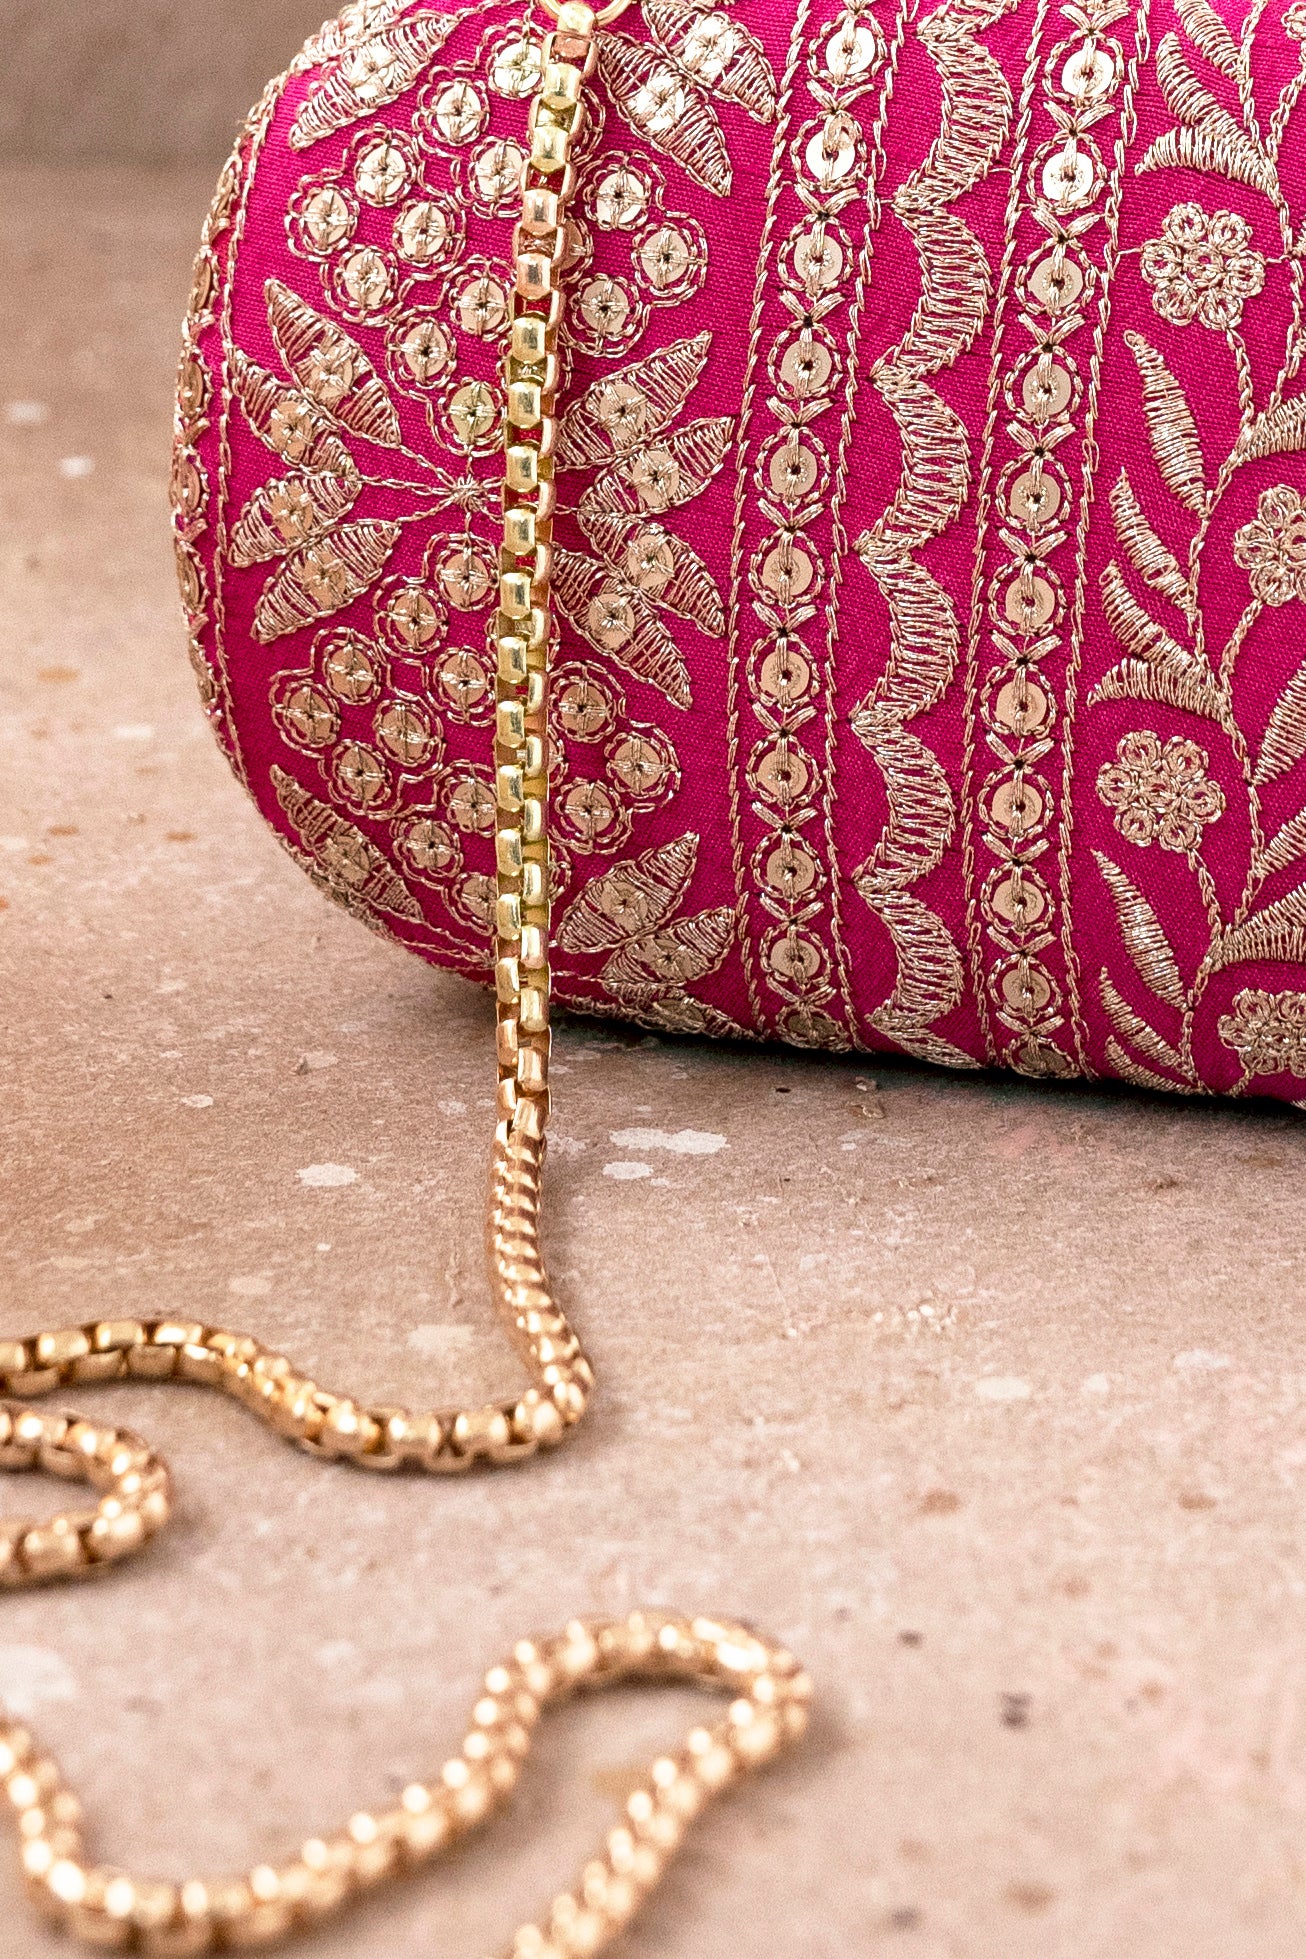 Heavy Embroidery Bridal Clutch | Pink Party Clutch